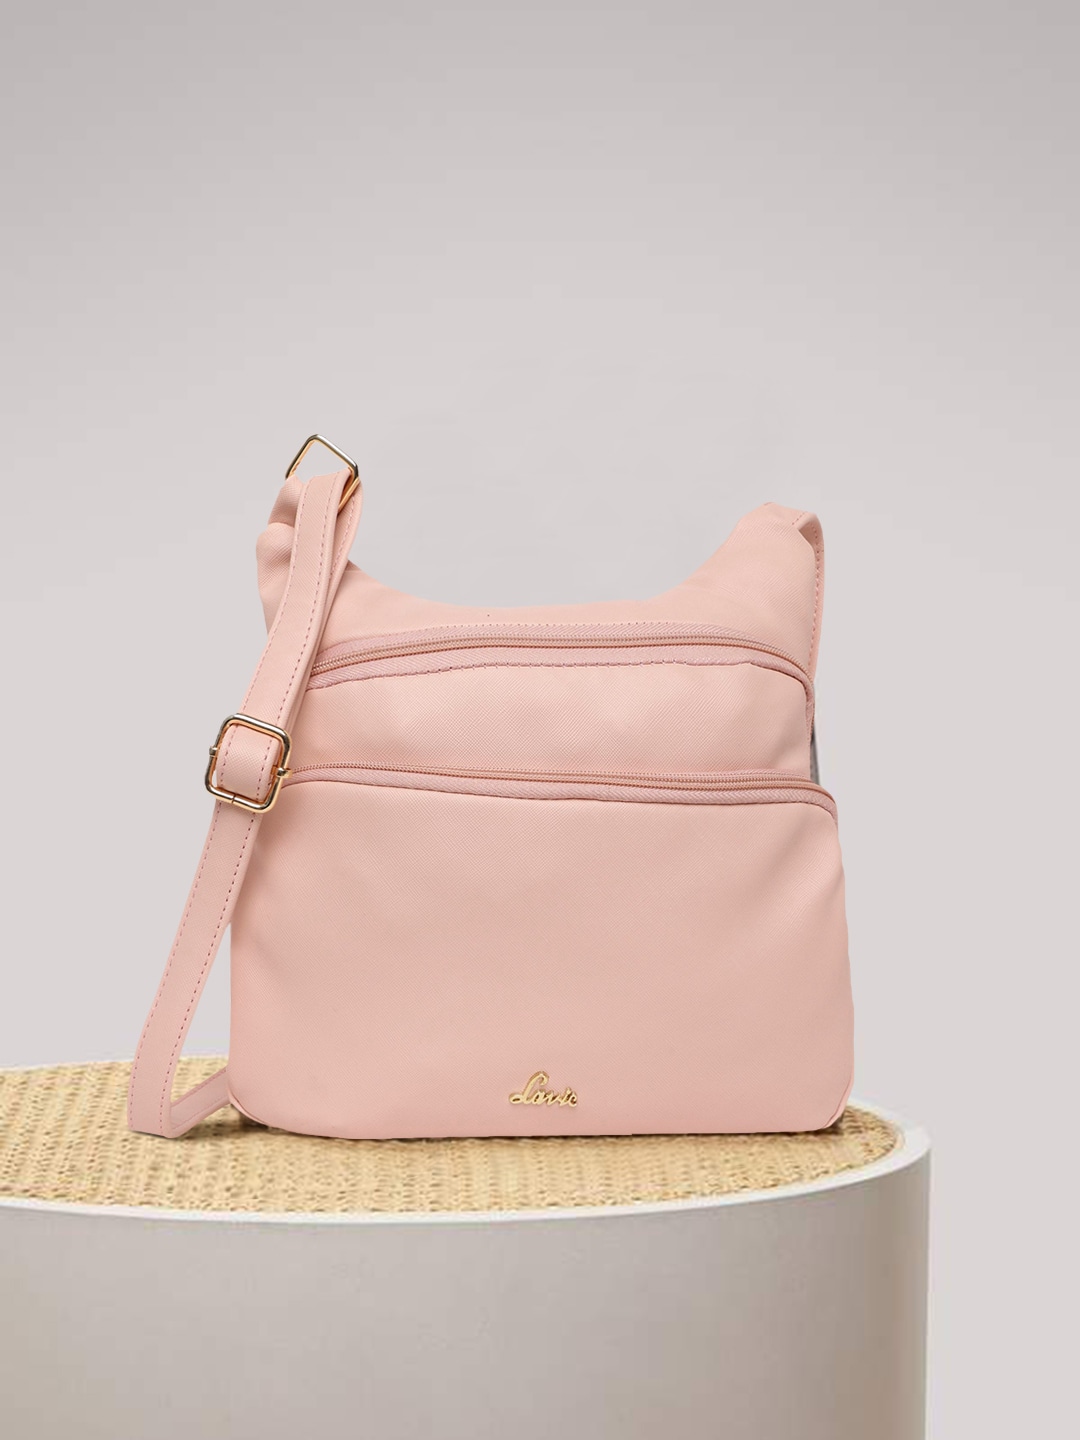 Lavie Pink Solid Sling Bag Price in India